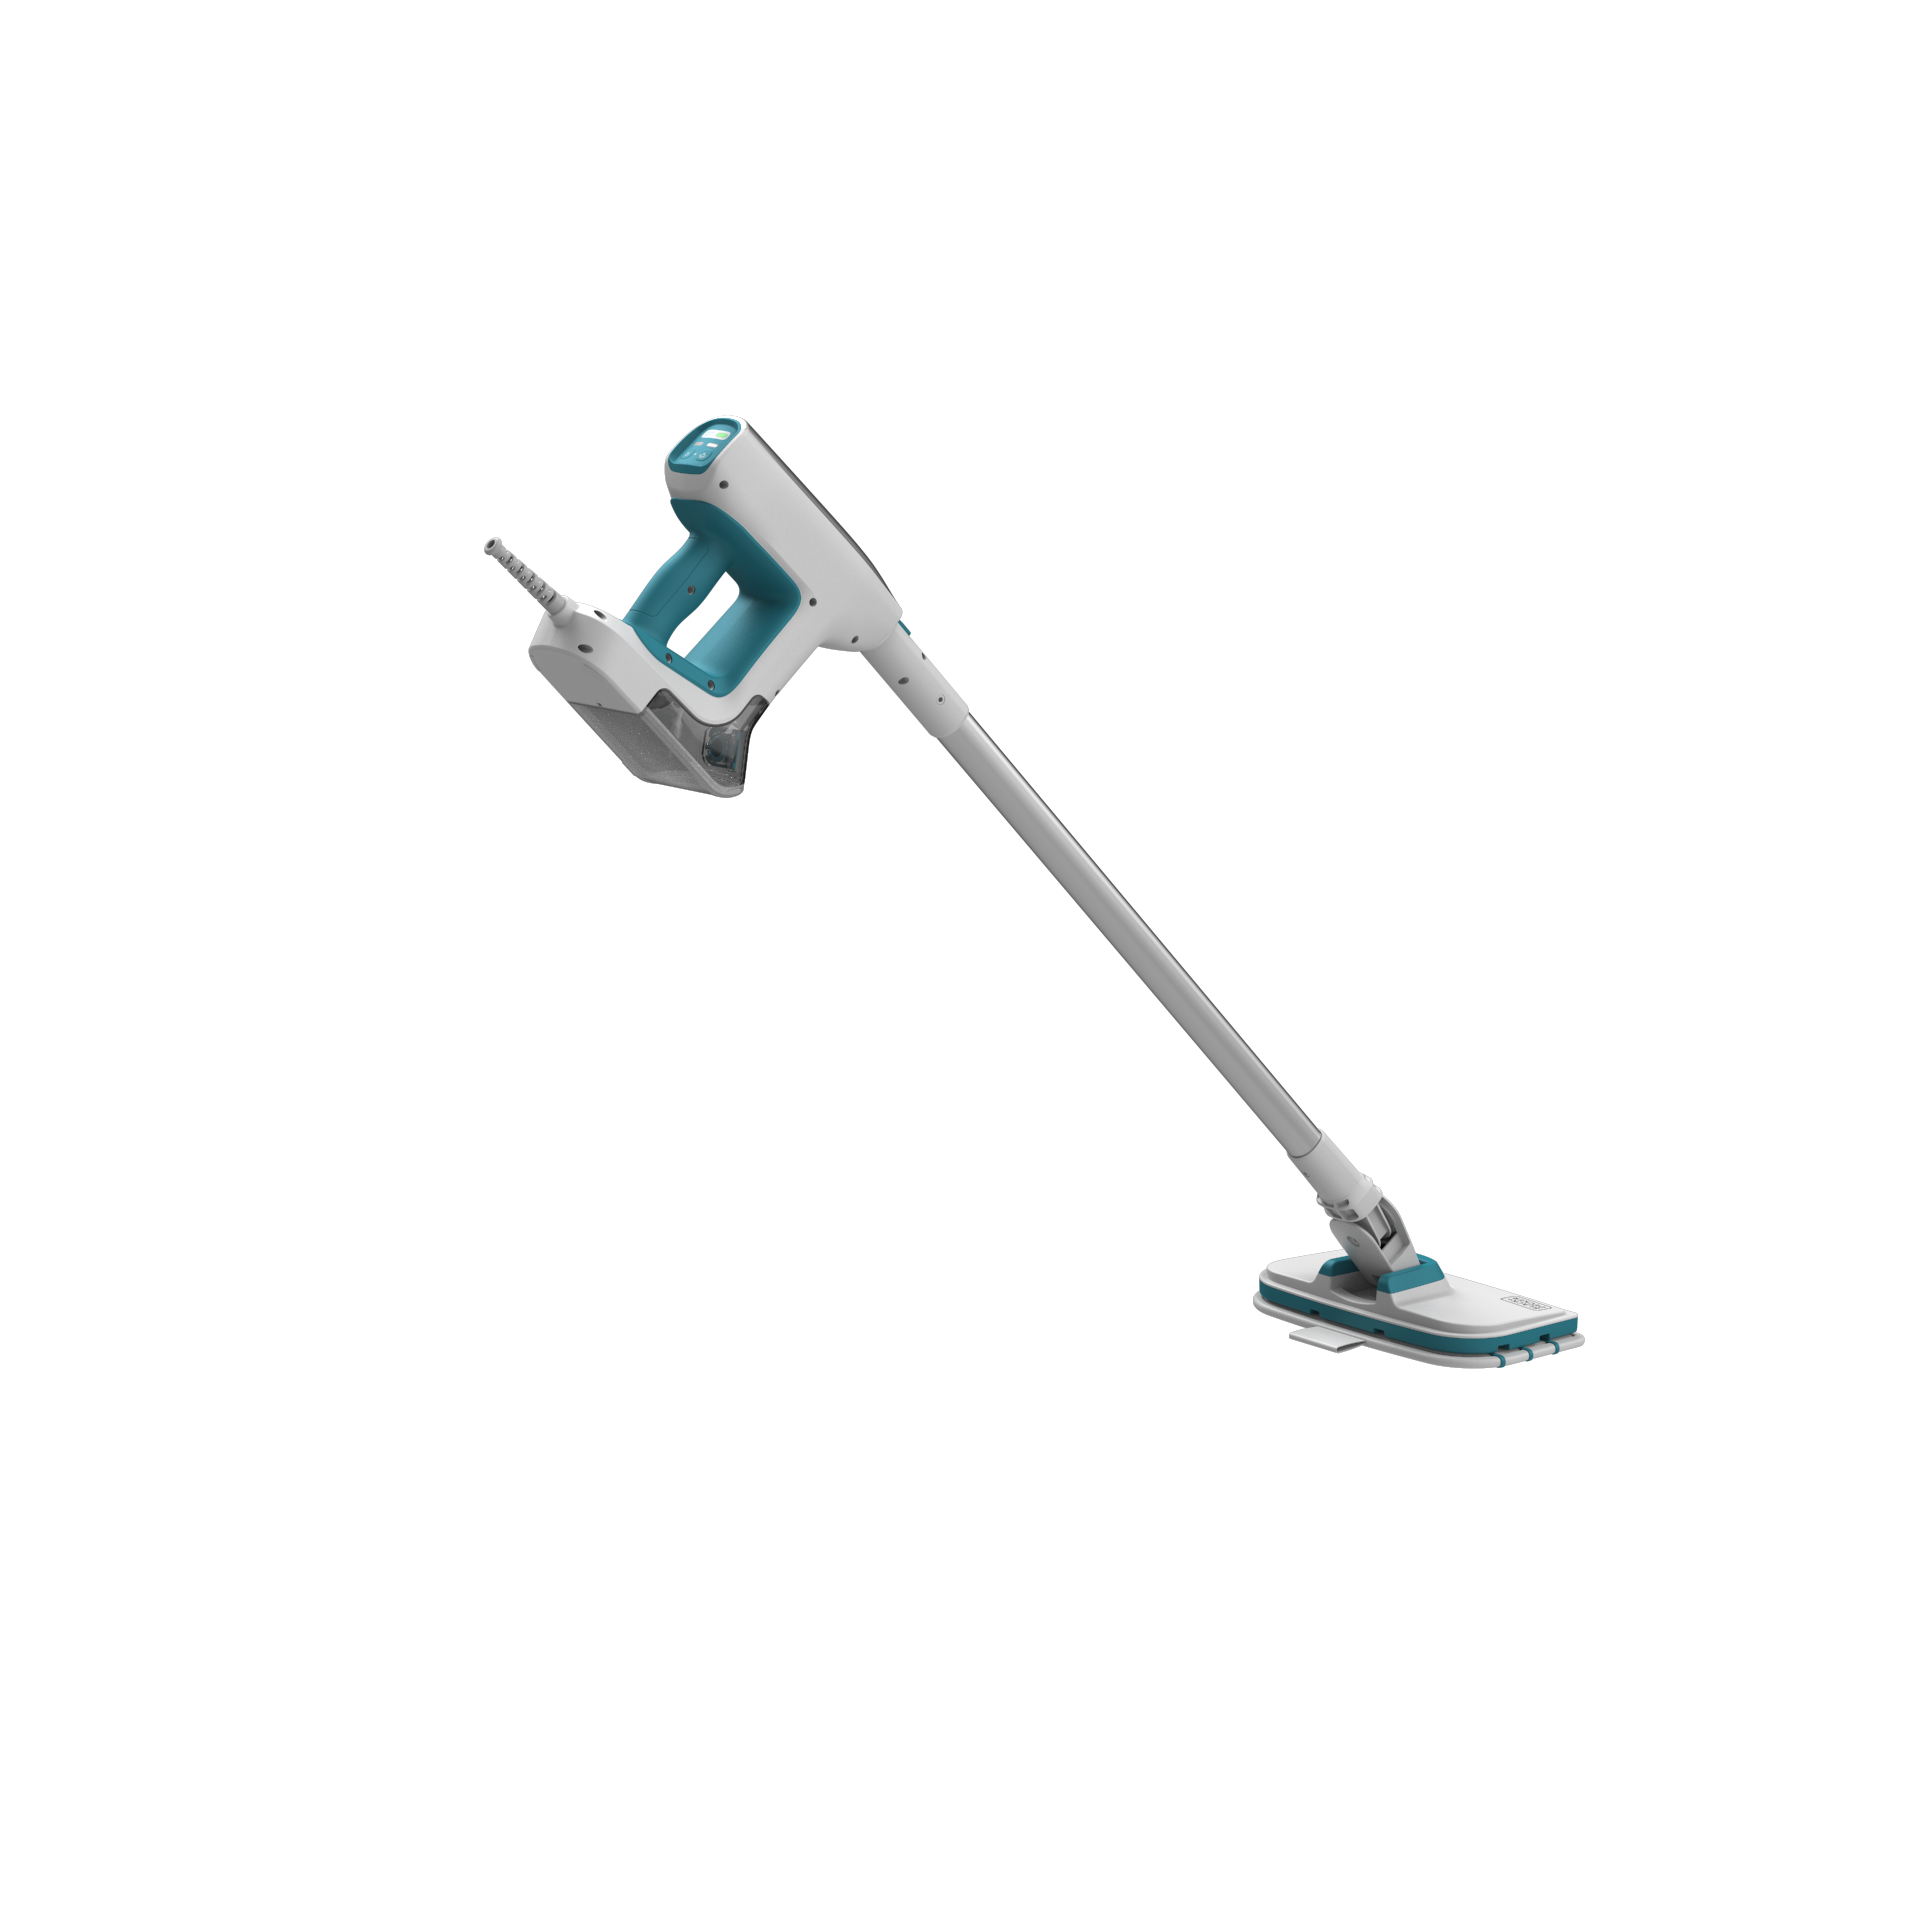 BLACK+DECKER Steam Mop Cleaning System with 6-Attachments